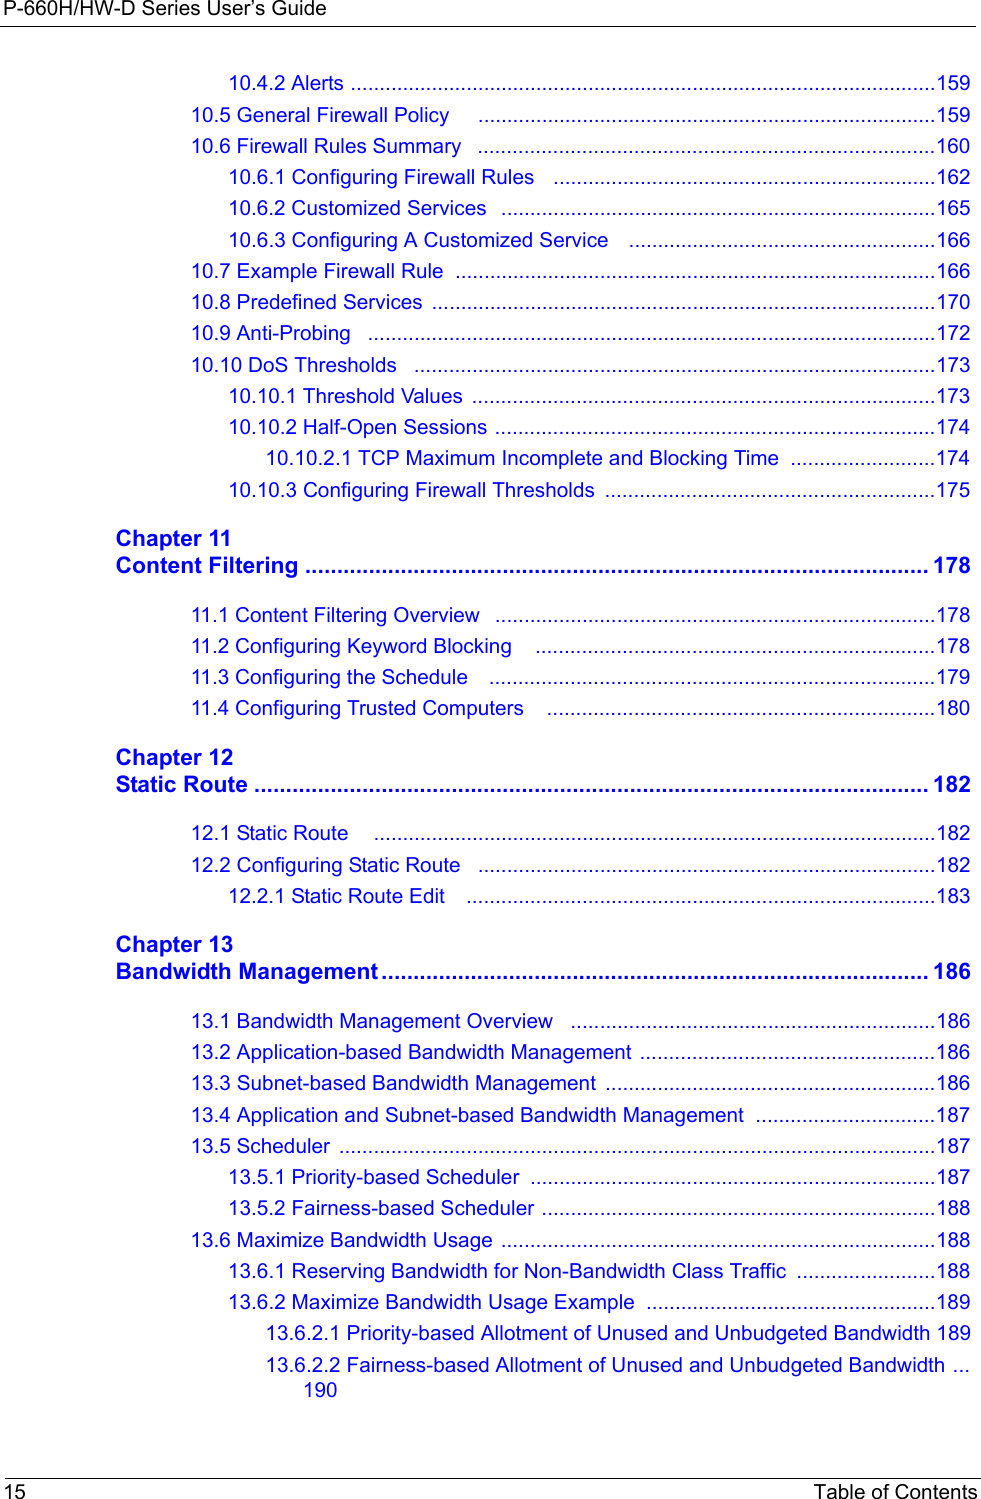 P-660H/HW-D Series User’s Guide15 Table of Contents10.4.2 Alerts .....................................................................................................15910.5 General Firewall Policy     ...............................................................................15910.6 Firewall Rules Summary   ...............................................................................16010.6.1 Configuring Firewall Rules   ..................................................................16210.6.2 Customized Services   ...........................................................................16510.6.3 Configuring A Customized Service    .....................................................16610.7 Example Firewall Rule  ...................................................................................16610.8 Predefined Services  .......................................................................................17010.9 Anti-Probing   ..................................................................................................17210.10 DoS Thresholds   ..........................................................................................17310.10.1 Threshold Values  ................................................................................17310.10.2 Half-Open Sessions ............................................................................17410.10.2.1 TCP Maximum Incomplete and Blocking Time  .........................17410.10.3 Configuring Firewall Thresholds  .........................................................175Chapter 11Content Filtering .................................................................................................. 17811.1 Content Filtering Overview   ............................................................................17811.2 Configuring Keyword Blocking    .....................................................................17811.3 Configuring the Schedule    .............................................................................17911.4 Configuring Trusted Computers    ...................................................................180Chapter 12Static Route .......................................................................................................... 18212.1 Static Route     .................................................................................................18212.2 Configuring Static Route   ...............................................................................18212.2.1 Static Route Edit    .................................................................................183Chapter 13Bandwidth Management ...................................................................................... 18613.1 Bandwidth Management Overview   ...............................................................18613.2 Application-based Bandwidth Management ...................................................18613.3 Subnet-based Bandwidth Management  .........................................................18613.4 Application and Subnet-based Bandwidth Management  ...............................18713.5 Scheduler  .......................................................................................................18713.5.1 Priority-based Scheduler ......................................................................18713.5.2 Fairness-based Scheduler ....................................................................18813.6 Maximize Bandwidth Usage ...........................................................................18813.6.1 Reserving Bandwidth for Non-Bandwidth Class Traffic  ........................18813.6.2 Maximize Bandwidth Usage Example ..................................................18913.6.2.1 Priority-based Allotment of Unused and Unbudgeted Bandwidth 18913.6.2.2 Fairness-based Allotment of Unused and Unbudgeted Bandwidth ...190